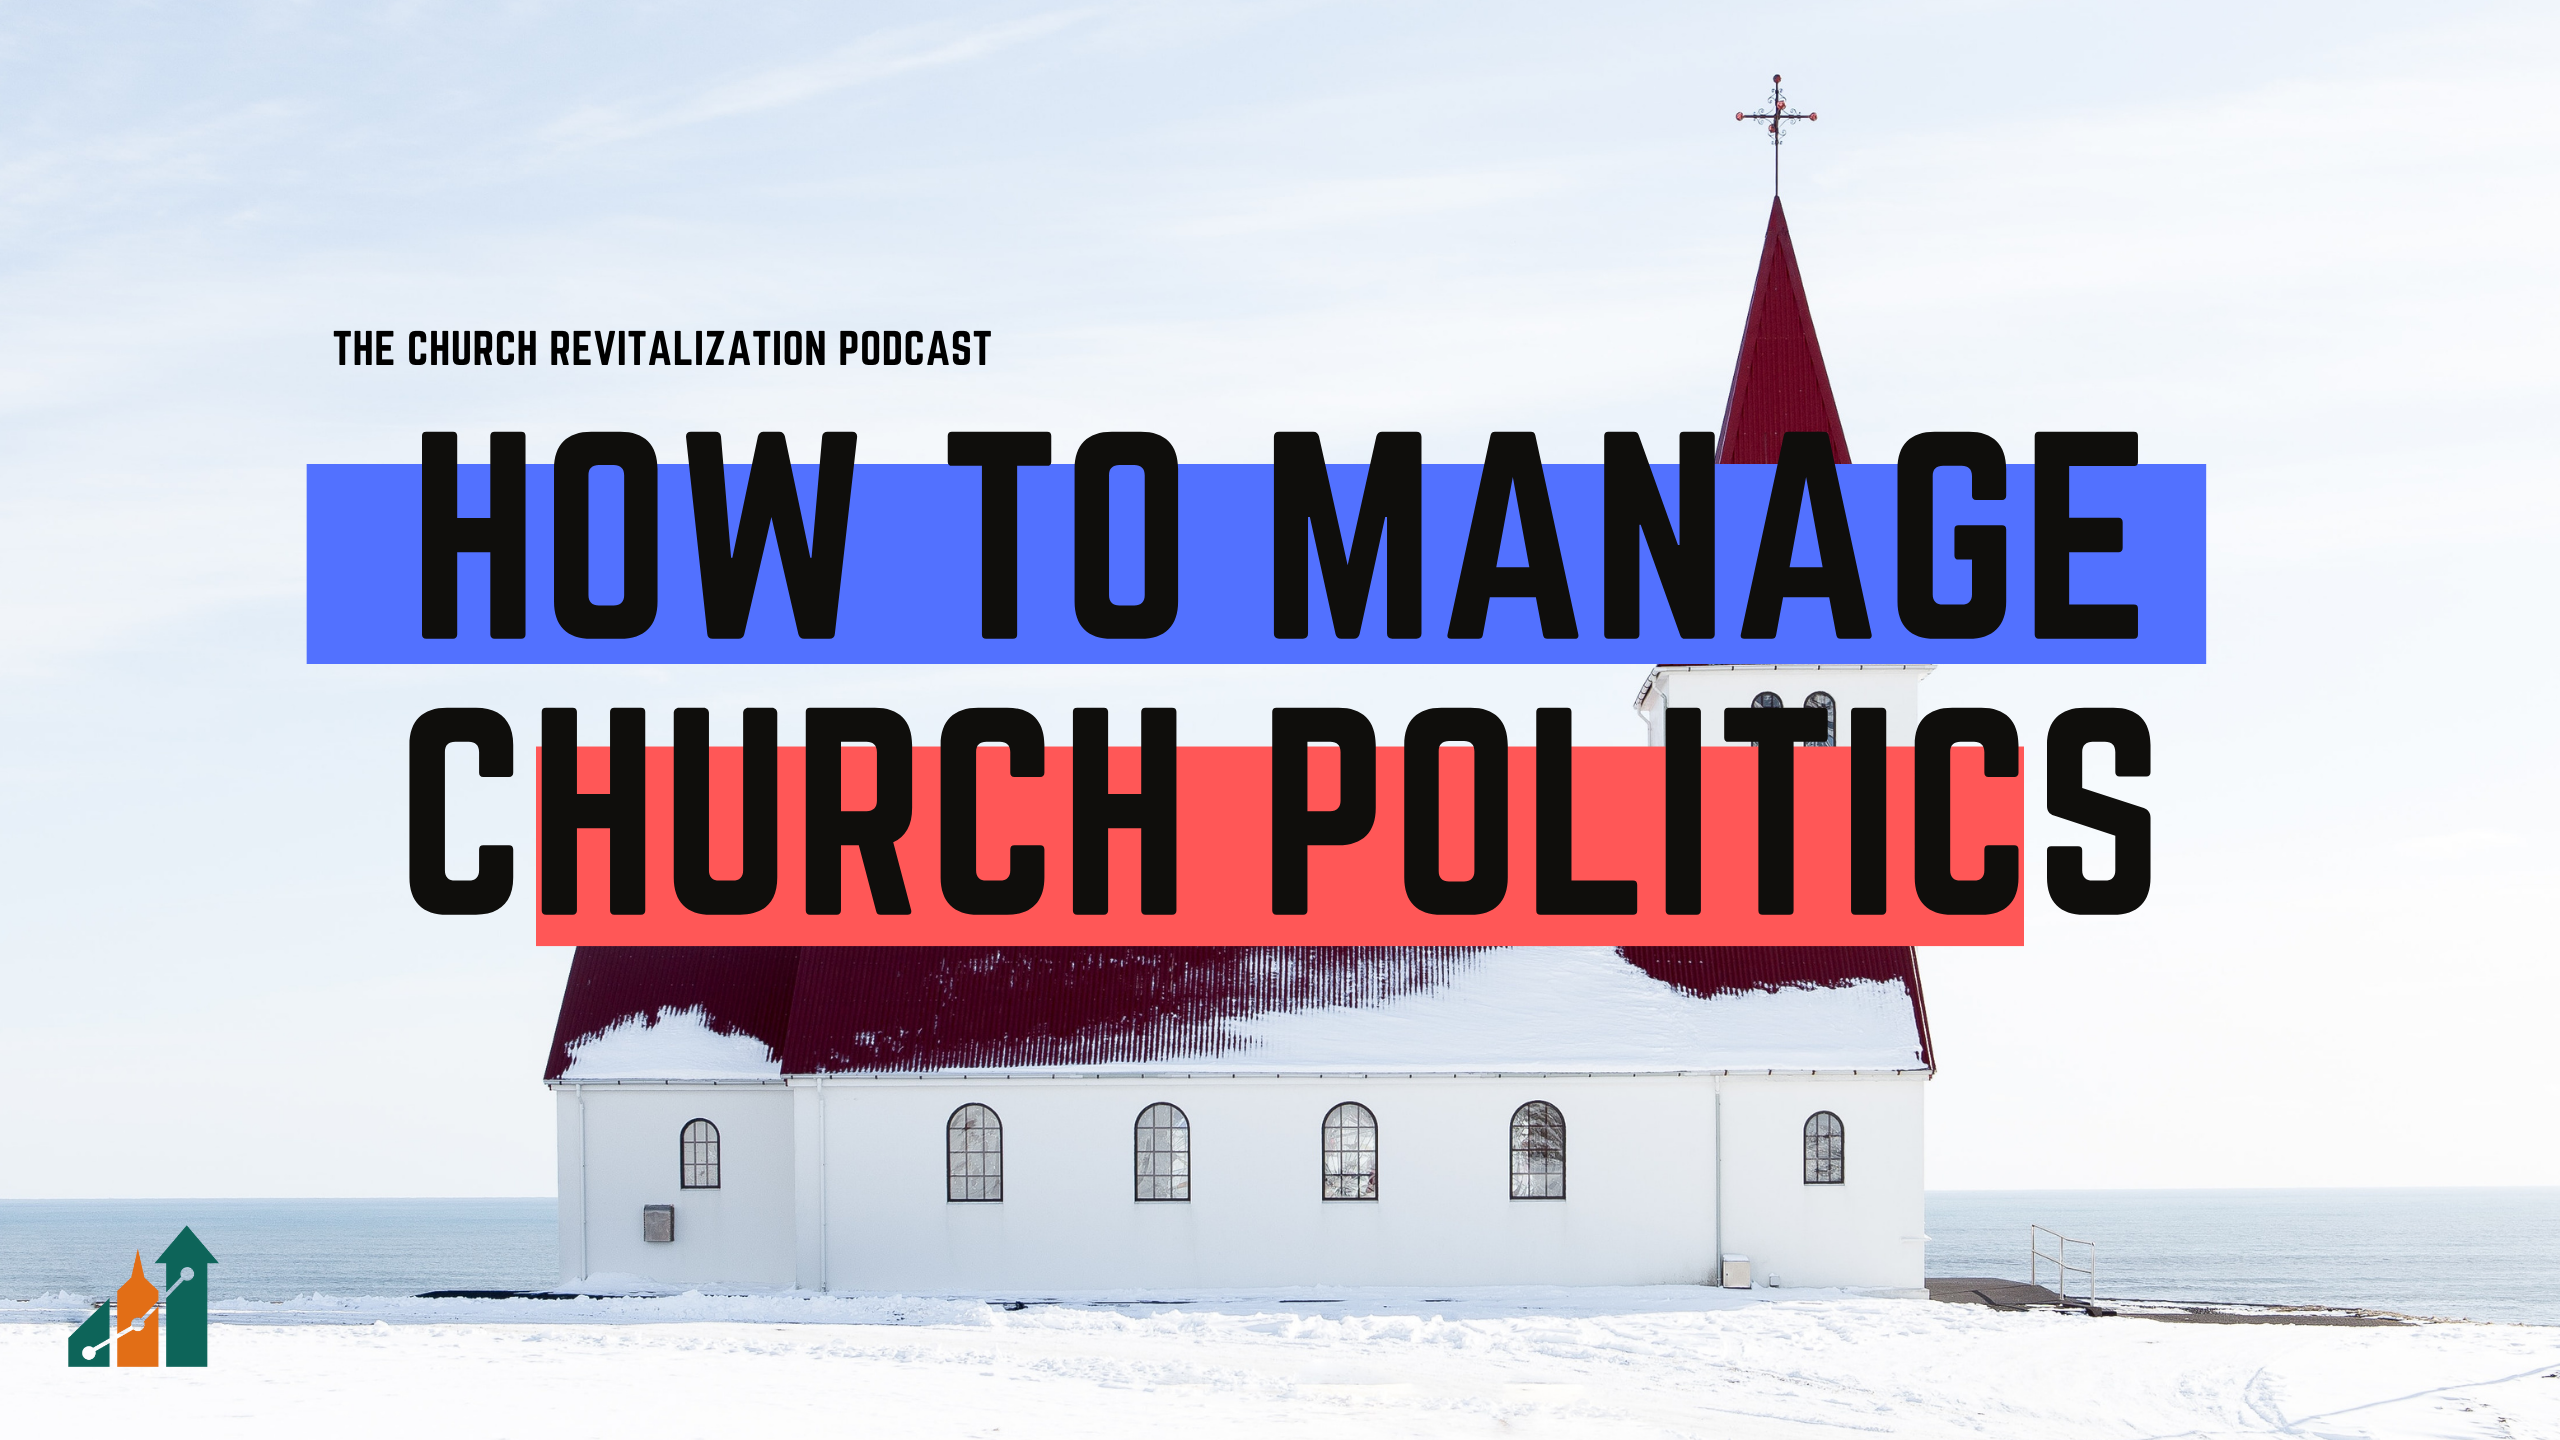 how-to-manage-church-politics_header-image-with-church-building